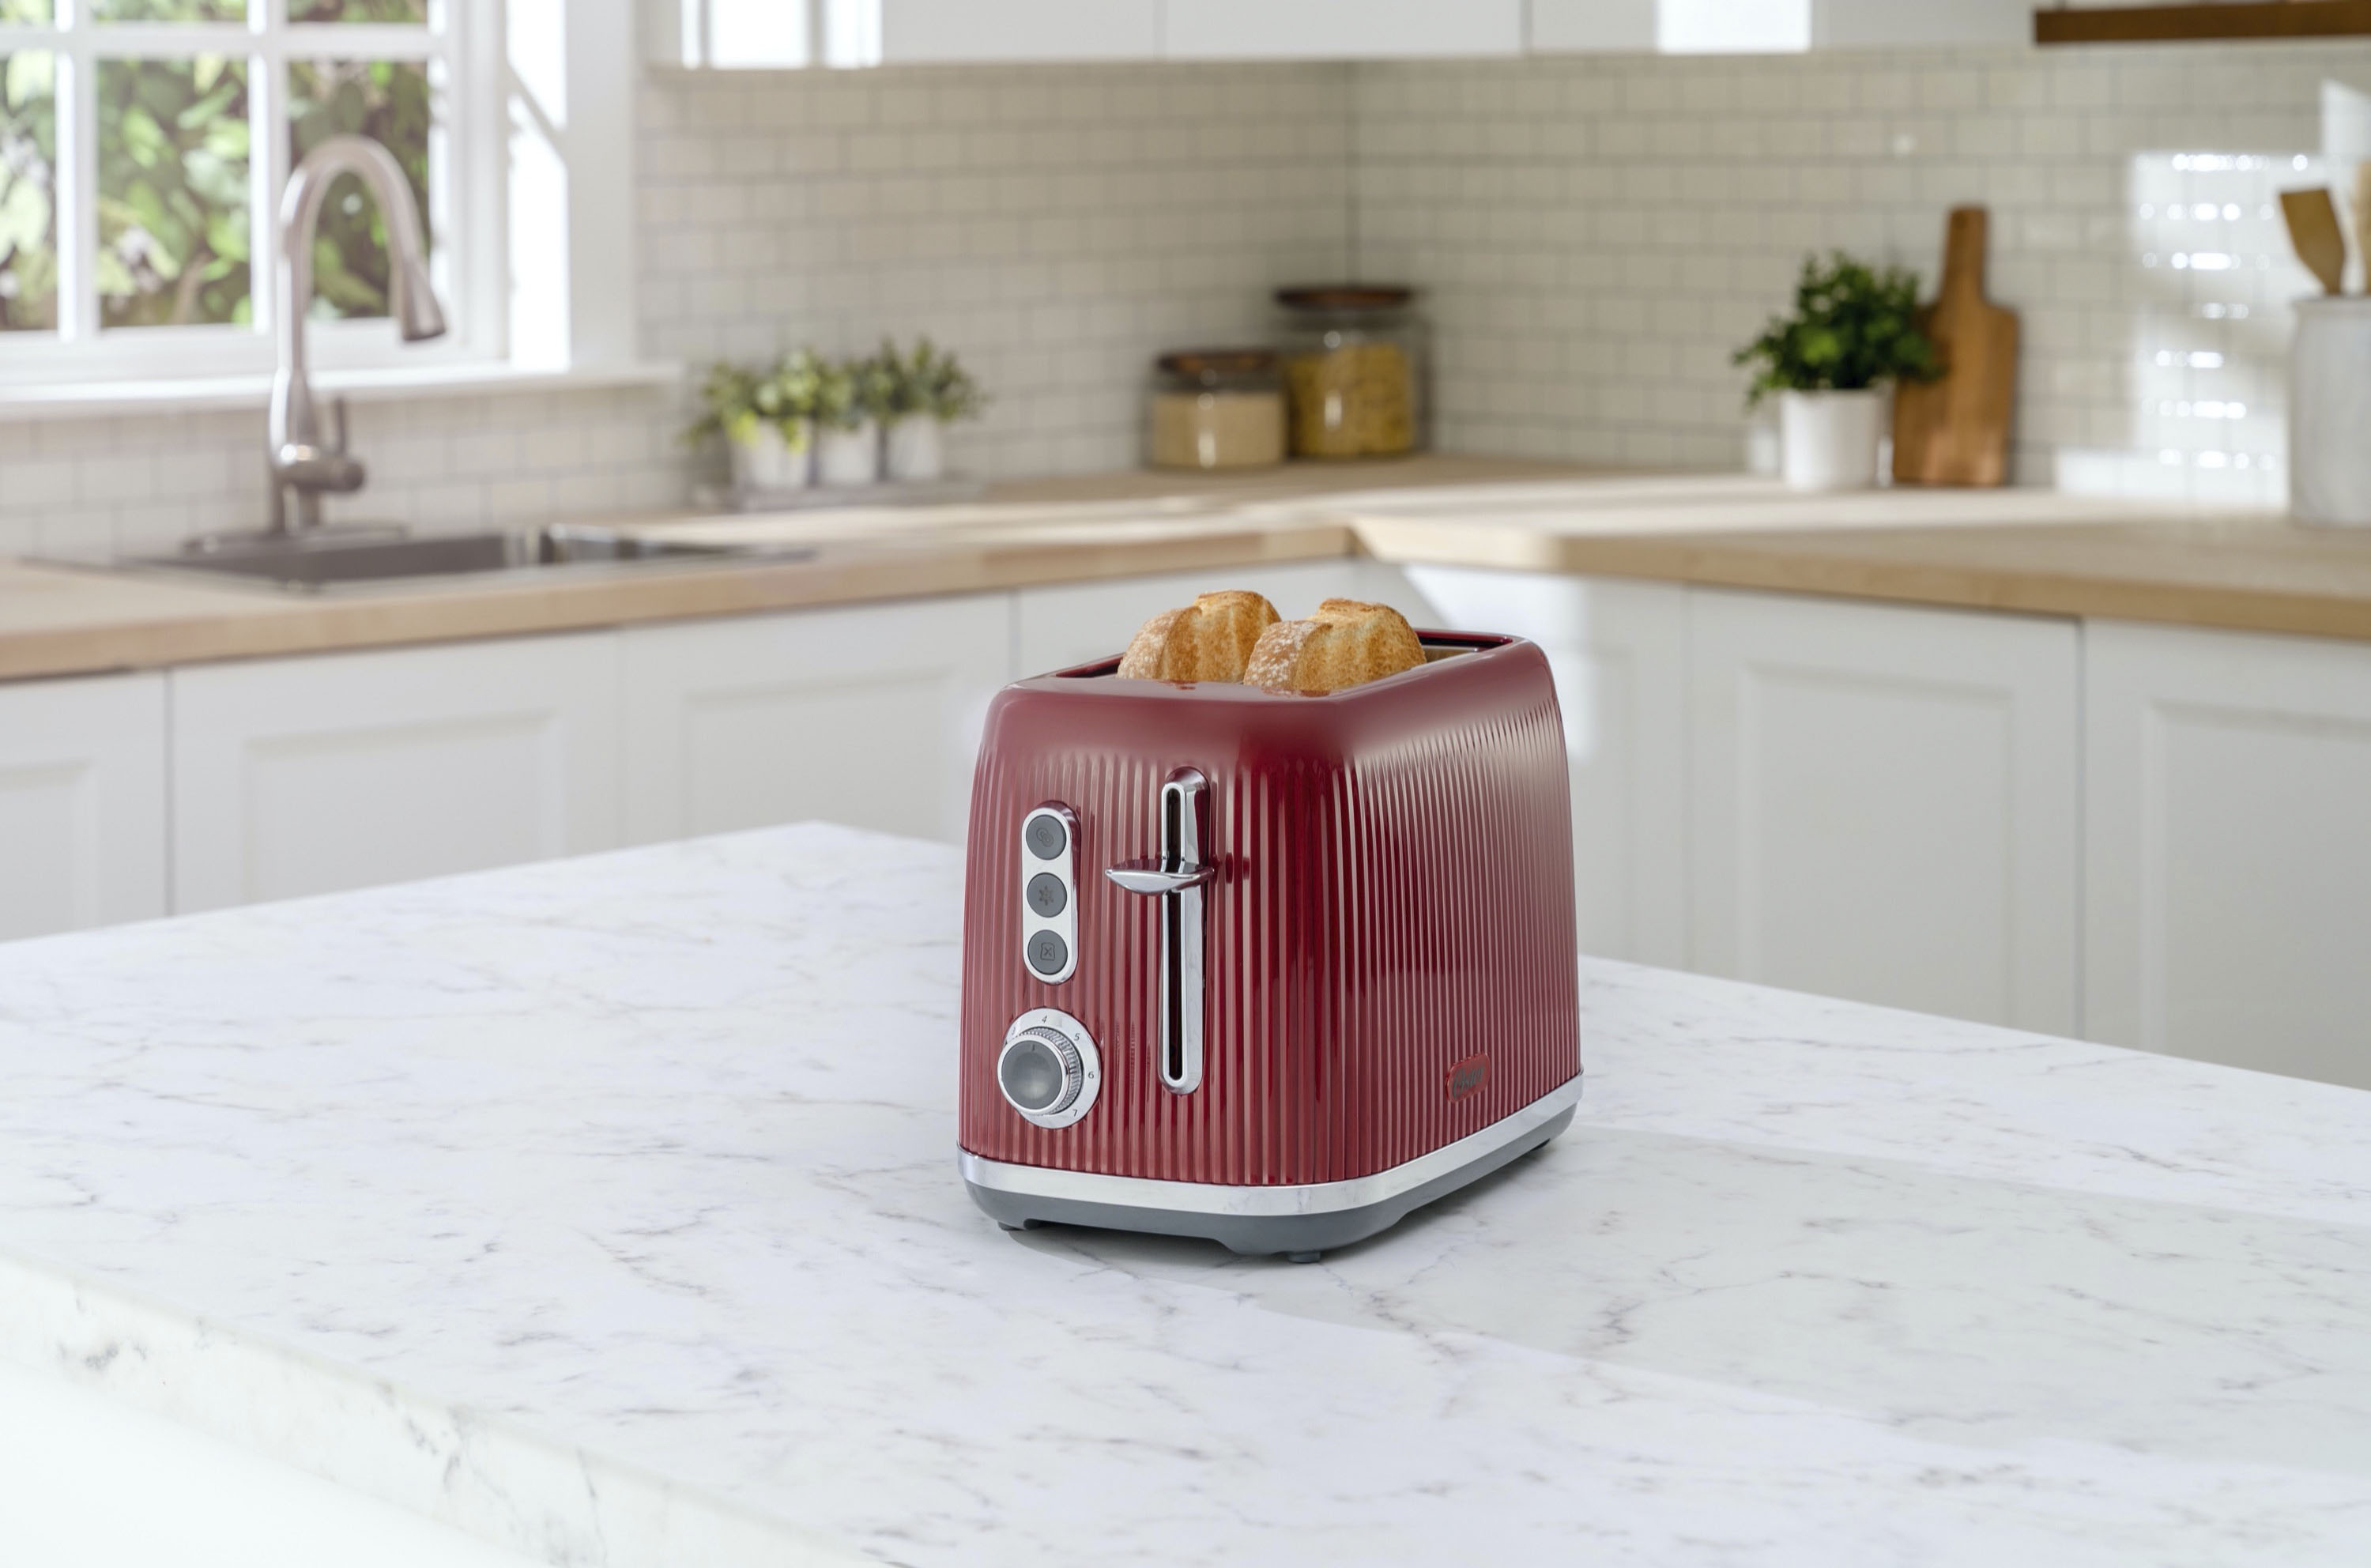 Oster 2-Slice Toaster, Red - Shop Toasters at H-E-B